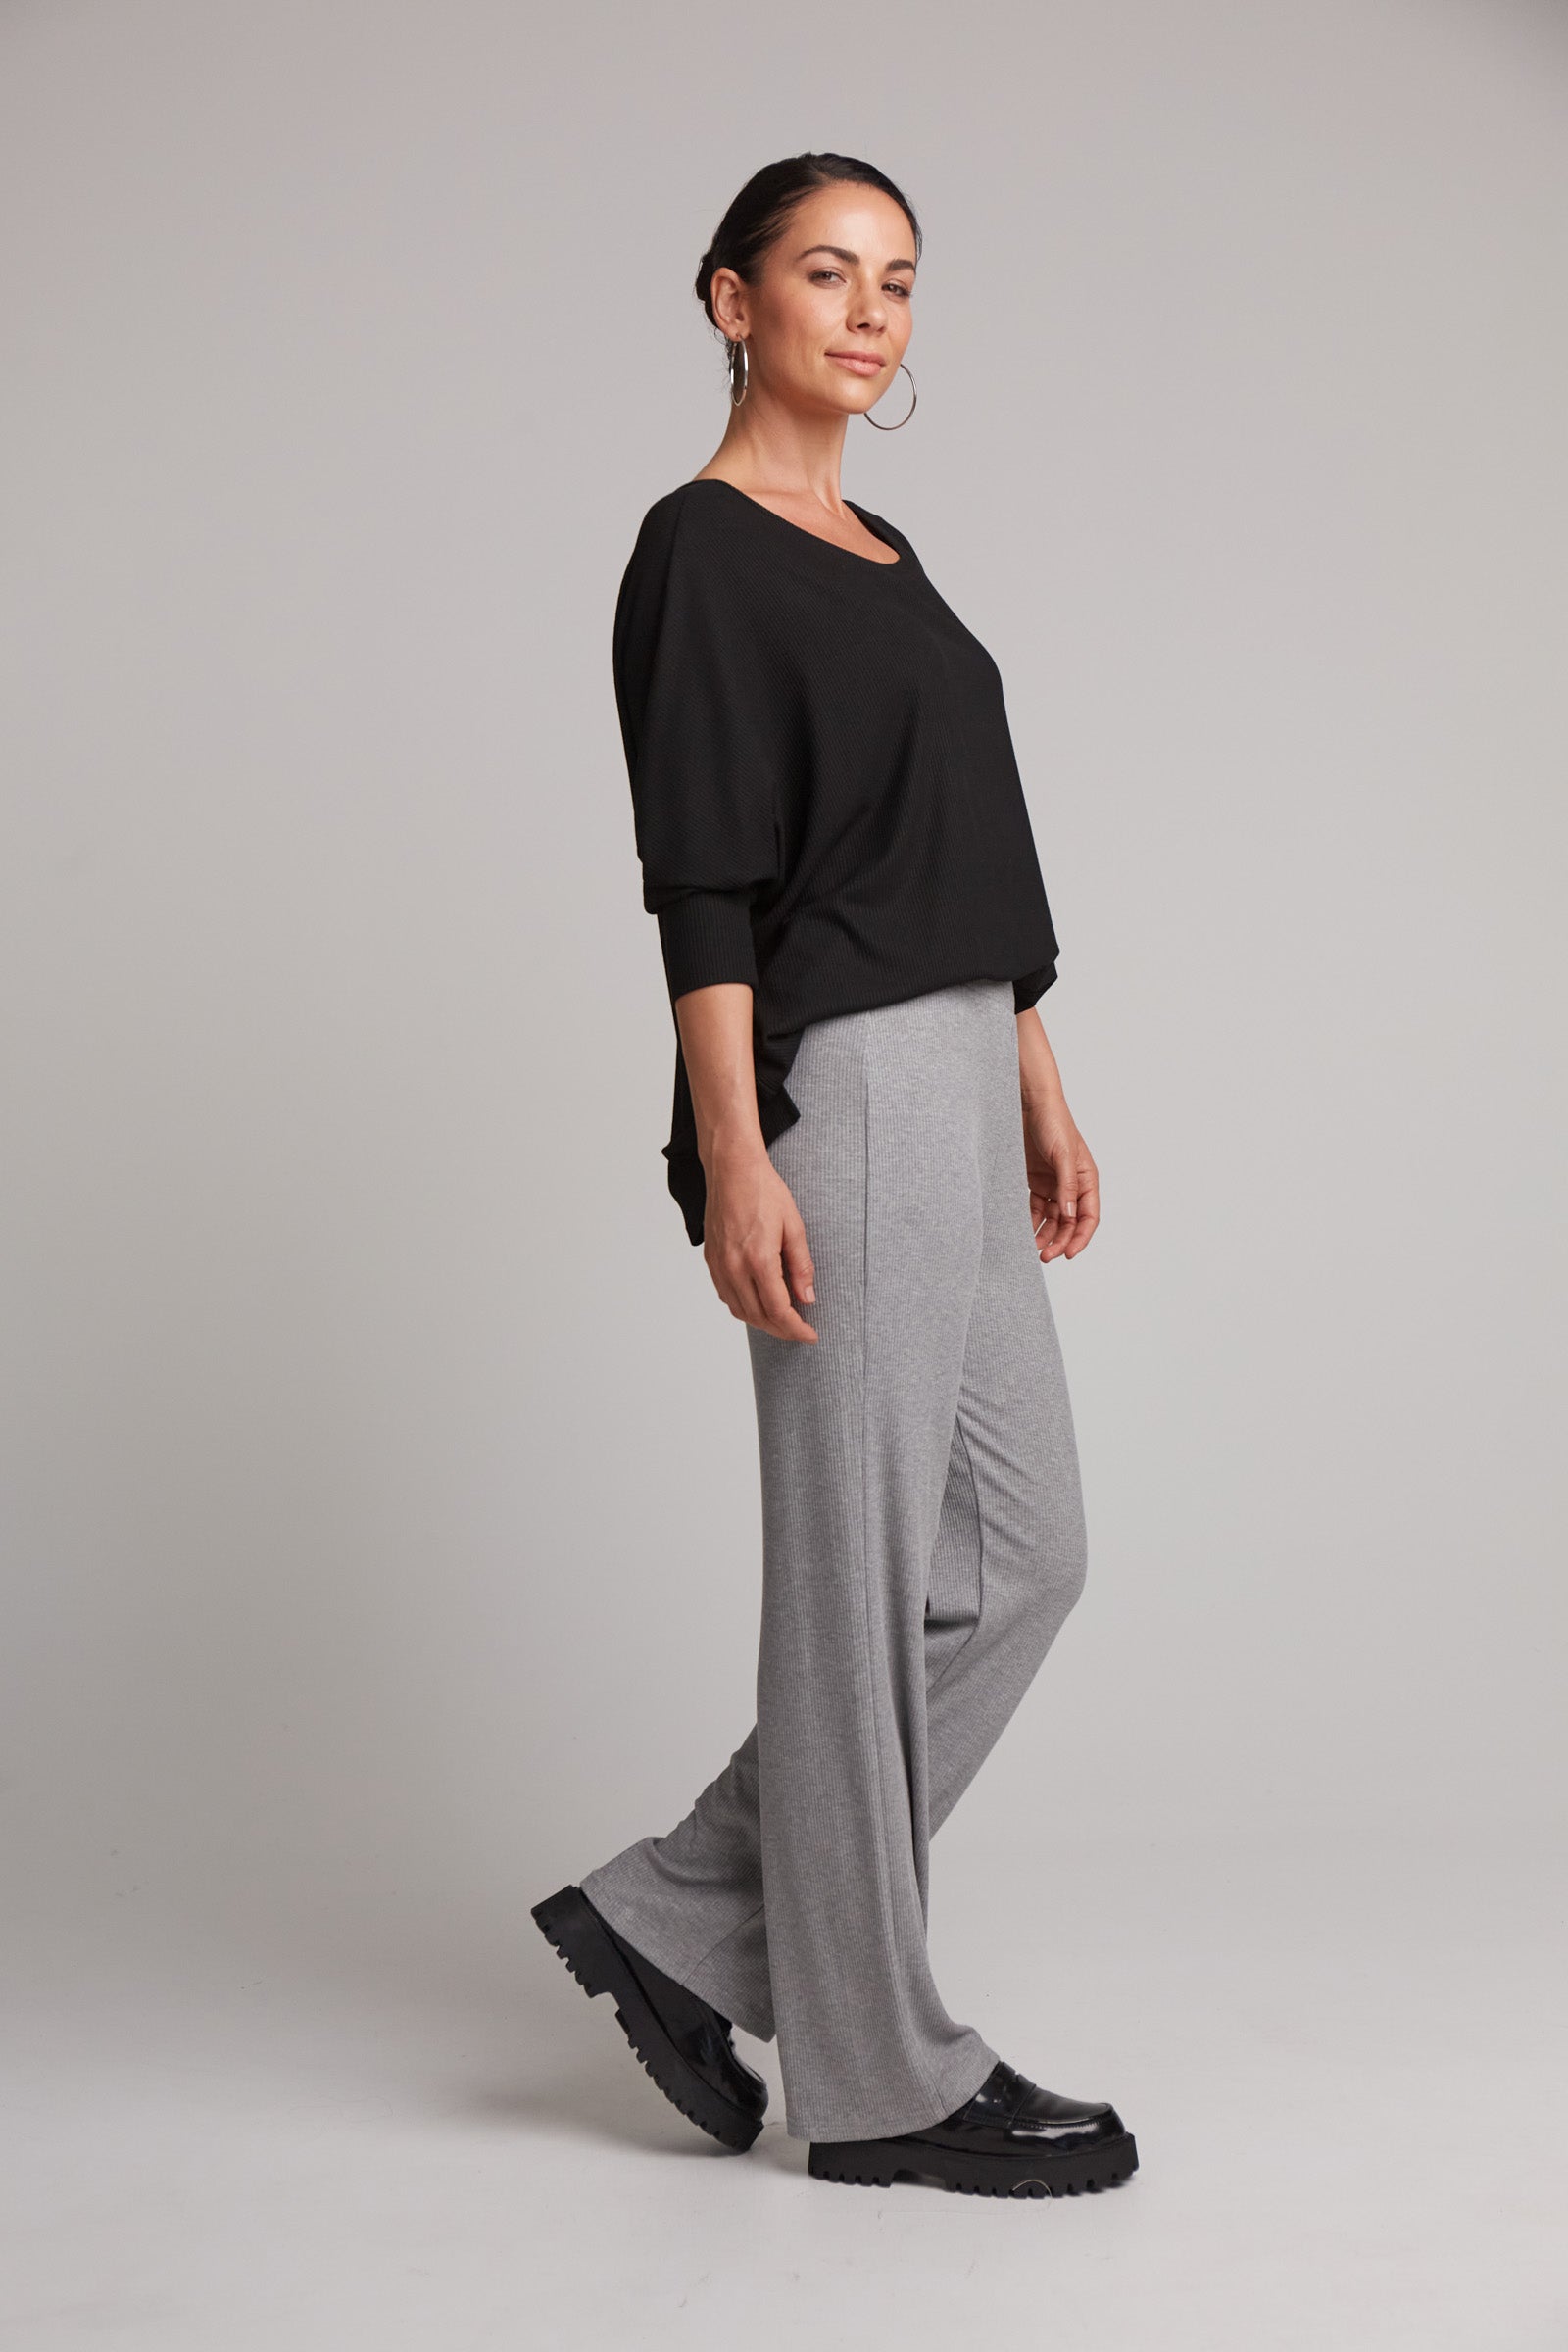 Studio Jersey Pant - Gray - eb&ive Clothing - Pant Relaxed Jersey